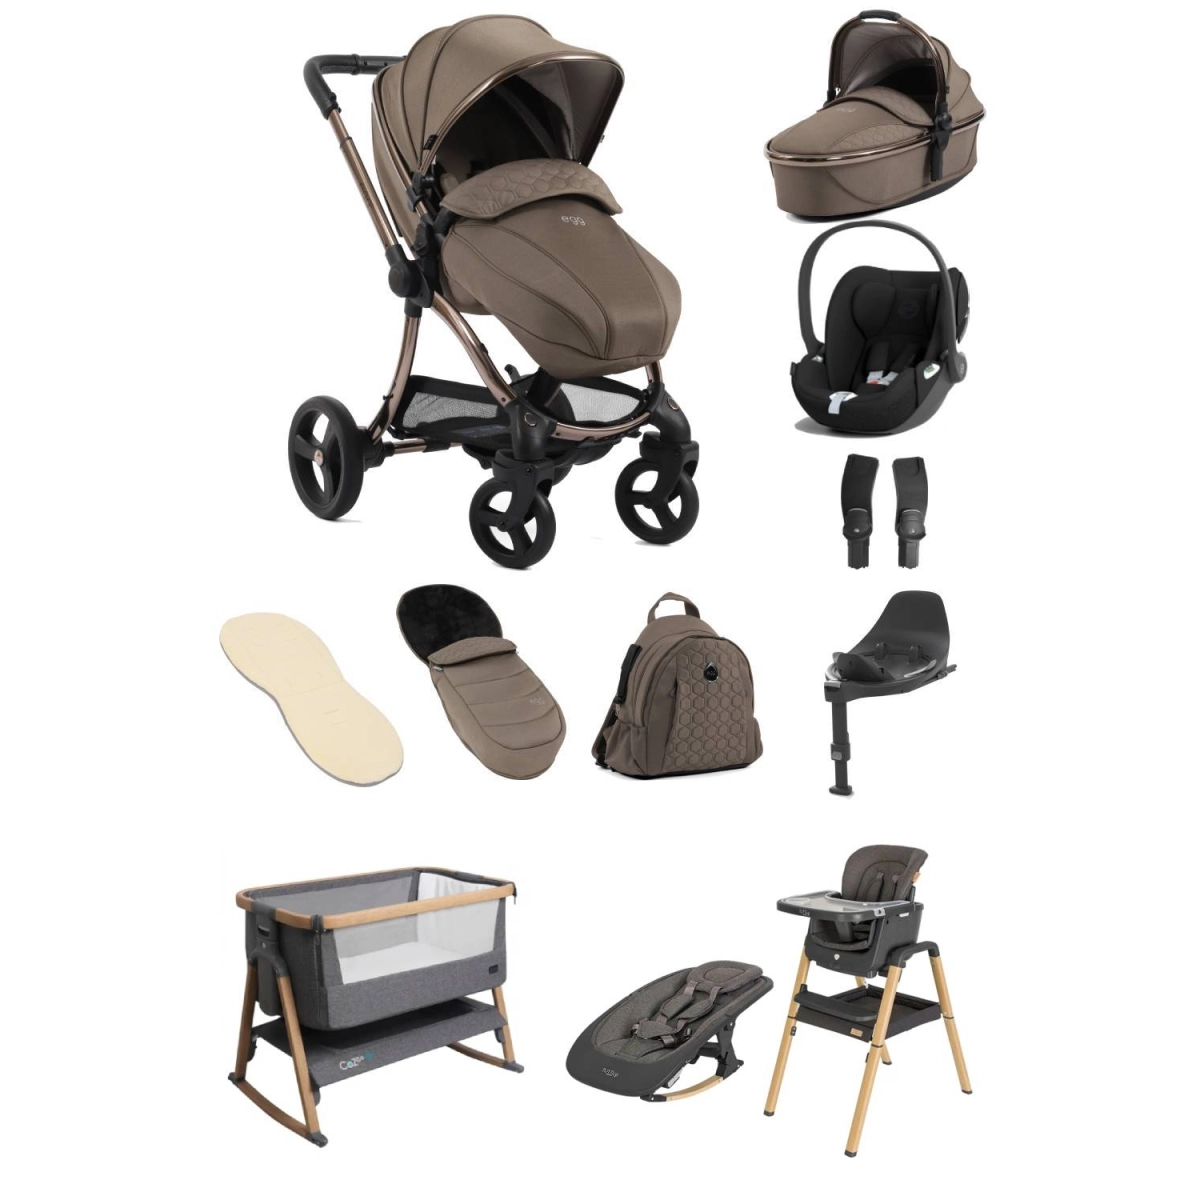 egg® 3 Stroller Travel & Home 10 Piece Bundle with Cybex Cloud T Car Seat